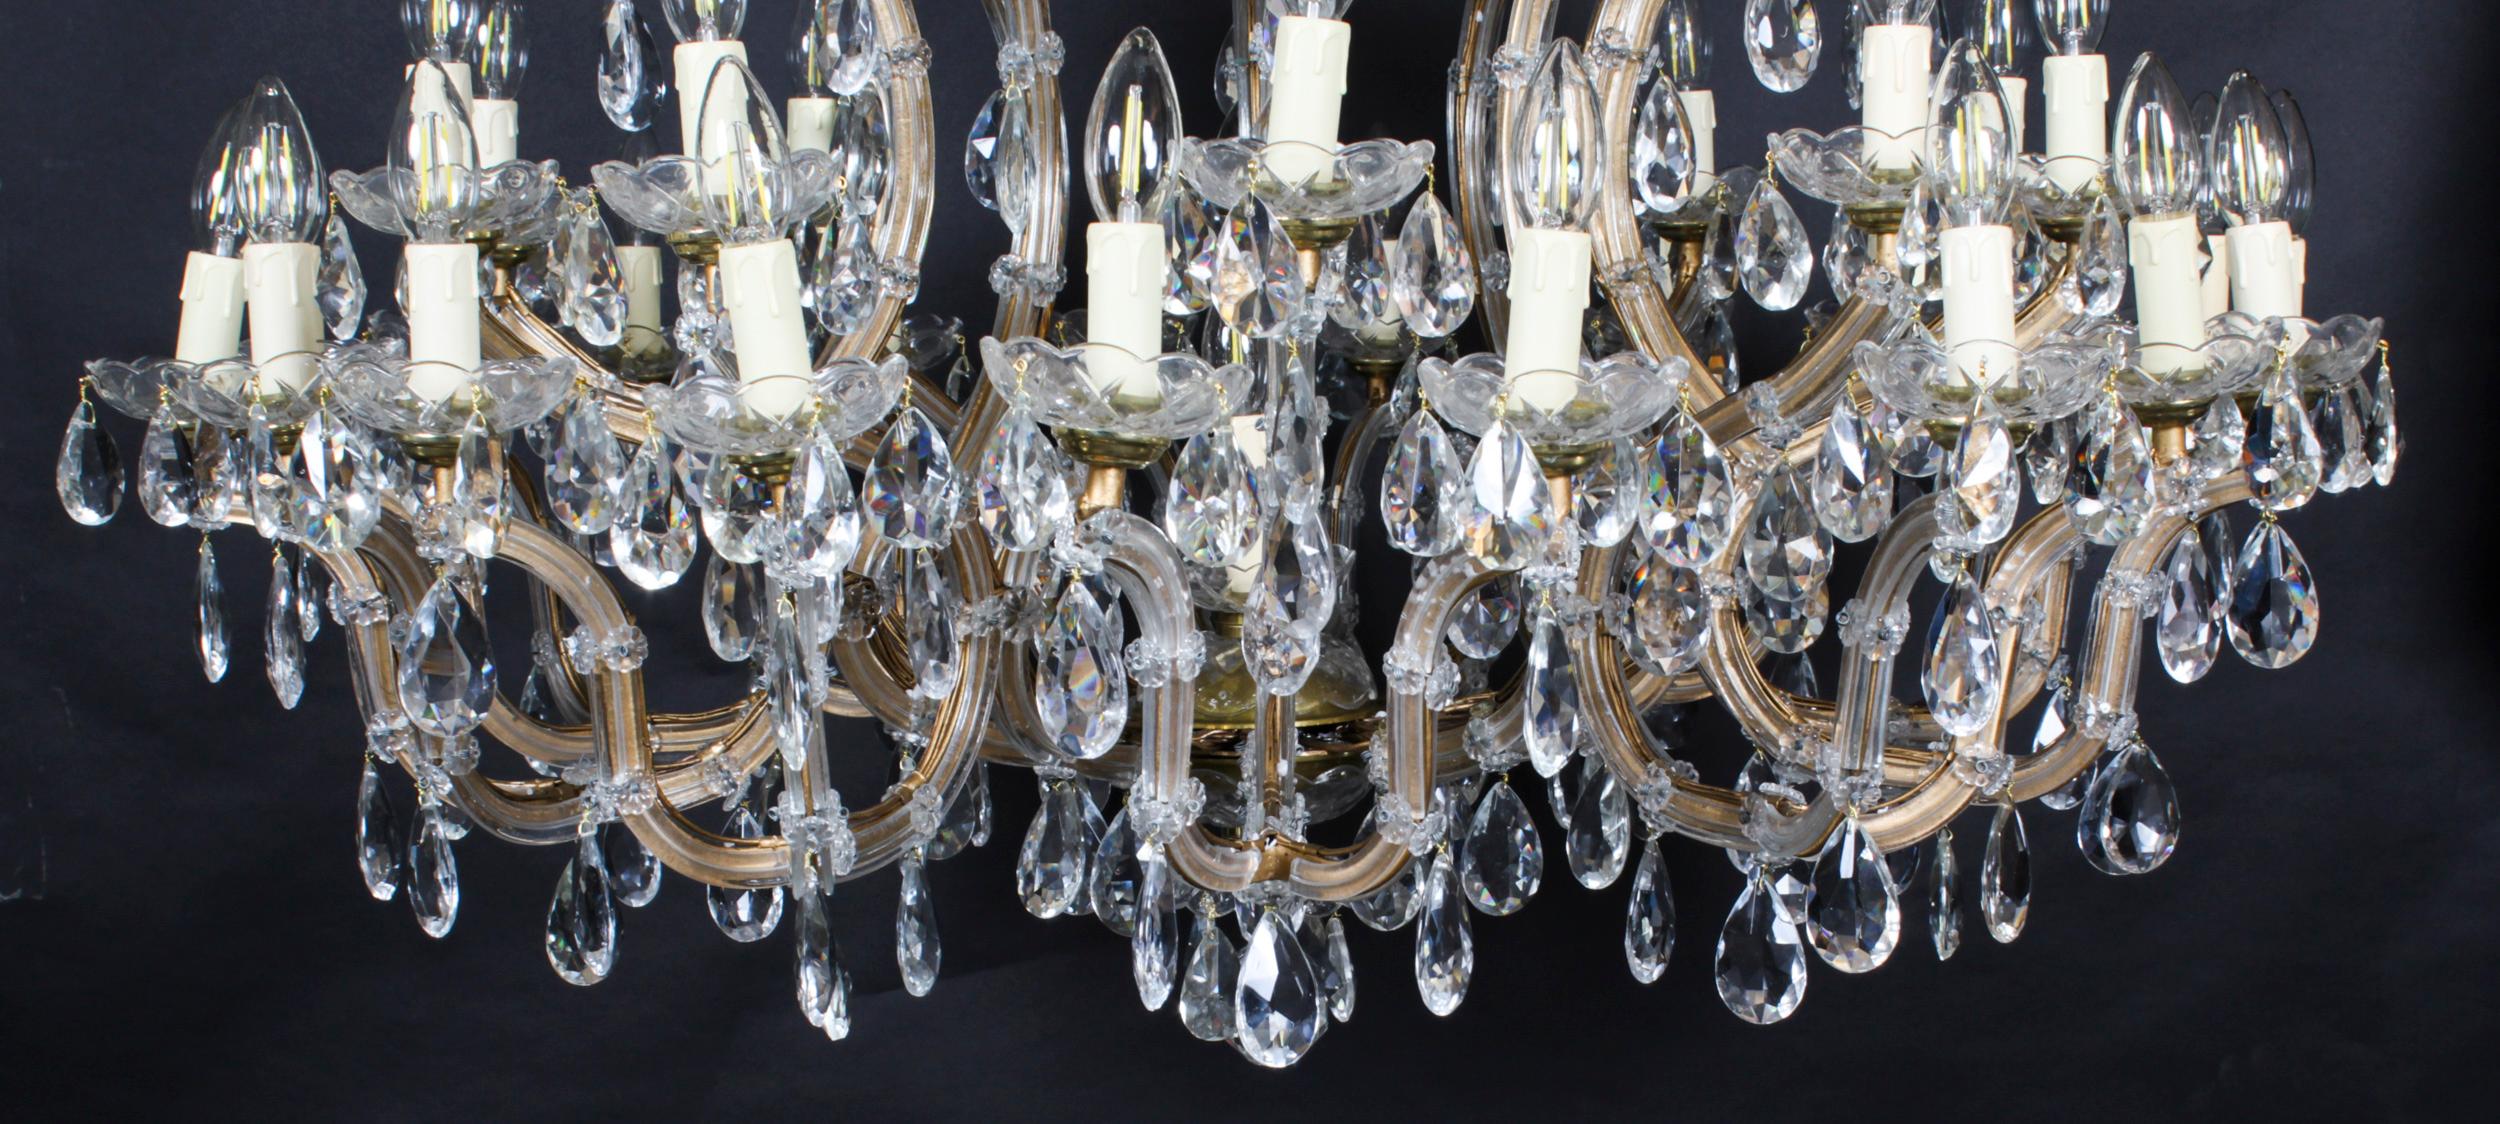 Antique Pair English 41 light Ballroom Crystal Chandeliers 1920s For Sale 1